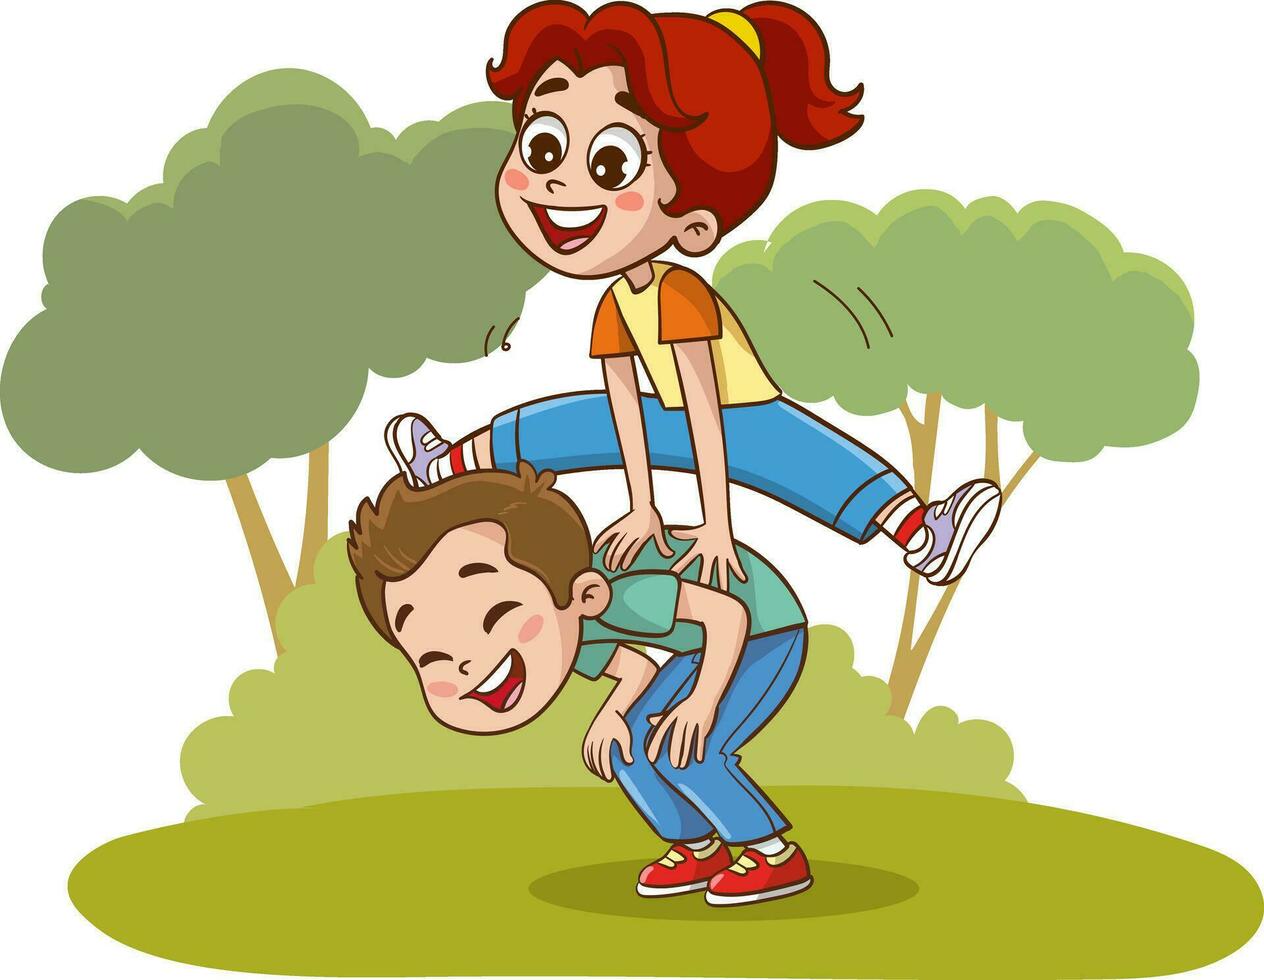 vector illustration of children playing leapfrog.Boy and girl playing together in the park. Vector illustration of a boy and girl playing in the park.